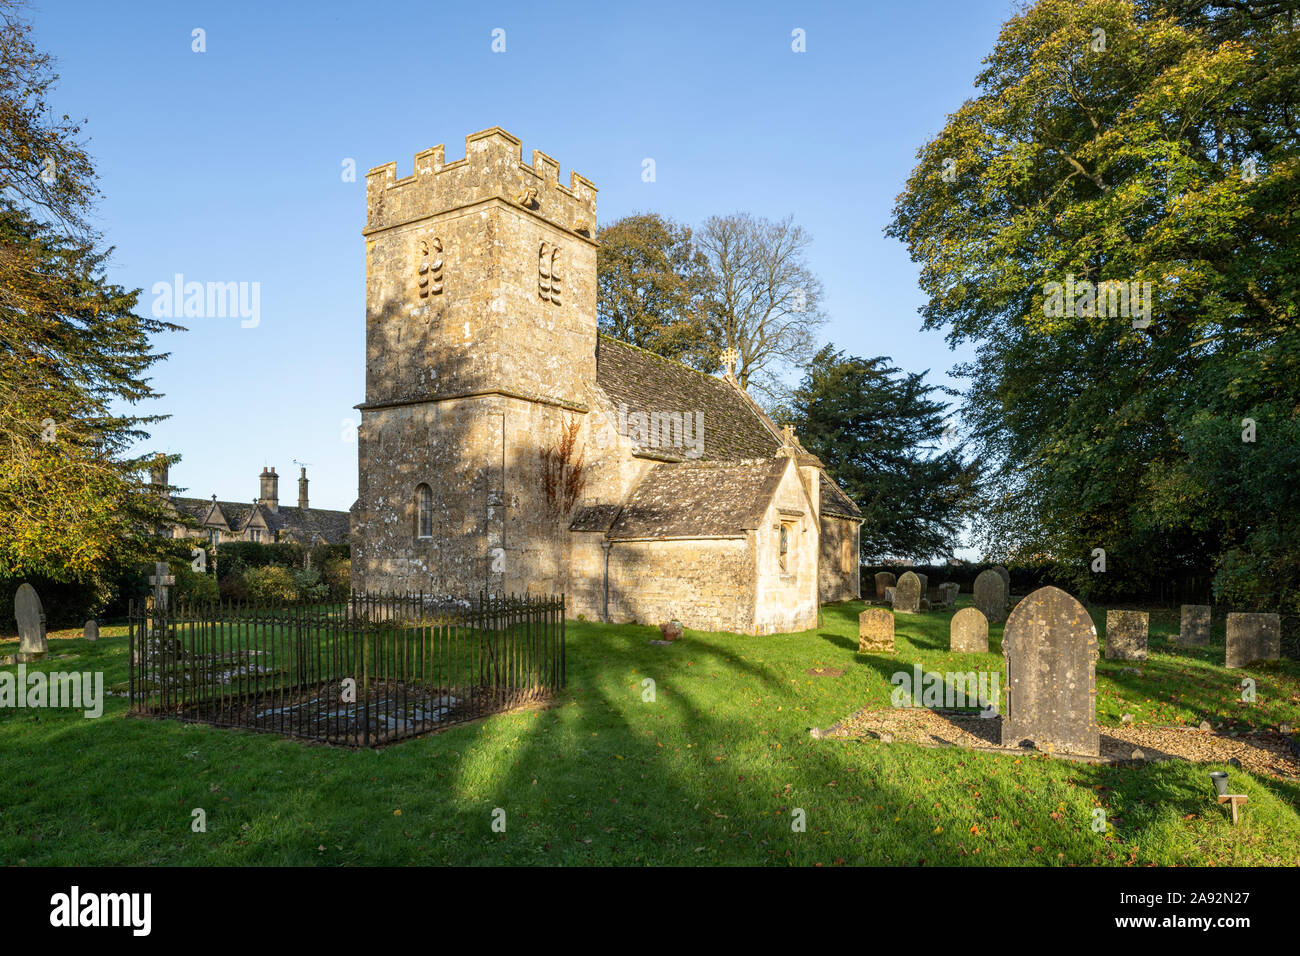 Small Norman All Saints church beside the Jacobean manor house in the grounds of Salperton Park in the Cotswold village of Salperton, Gloucestershire. Stock Photo